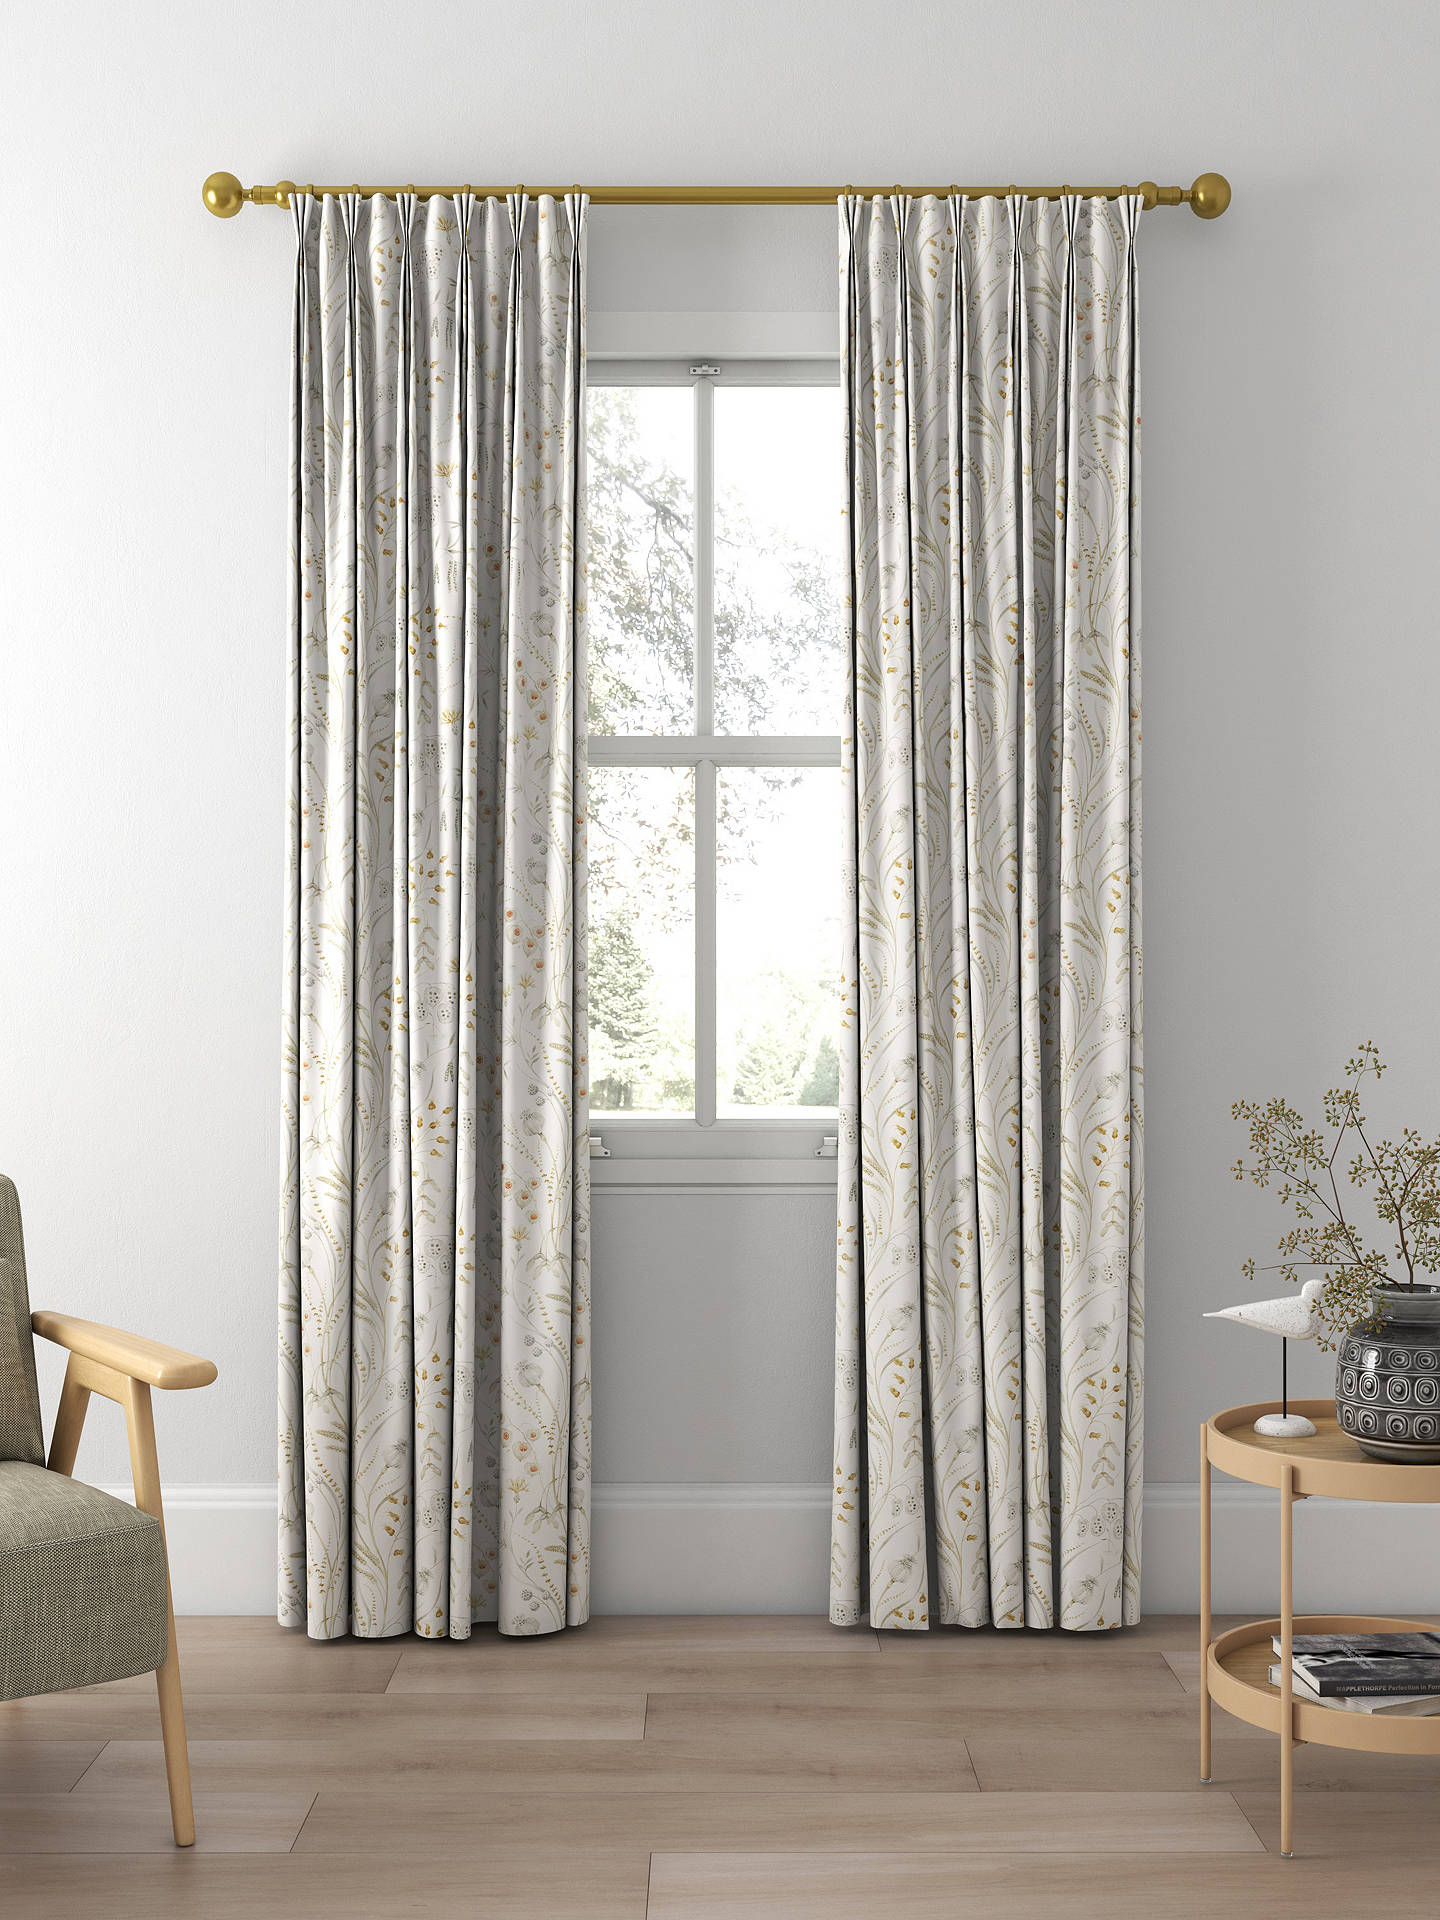 Sanderson Summer Harvest Made to Measure Curtains, Silver/Corn